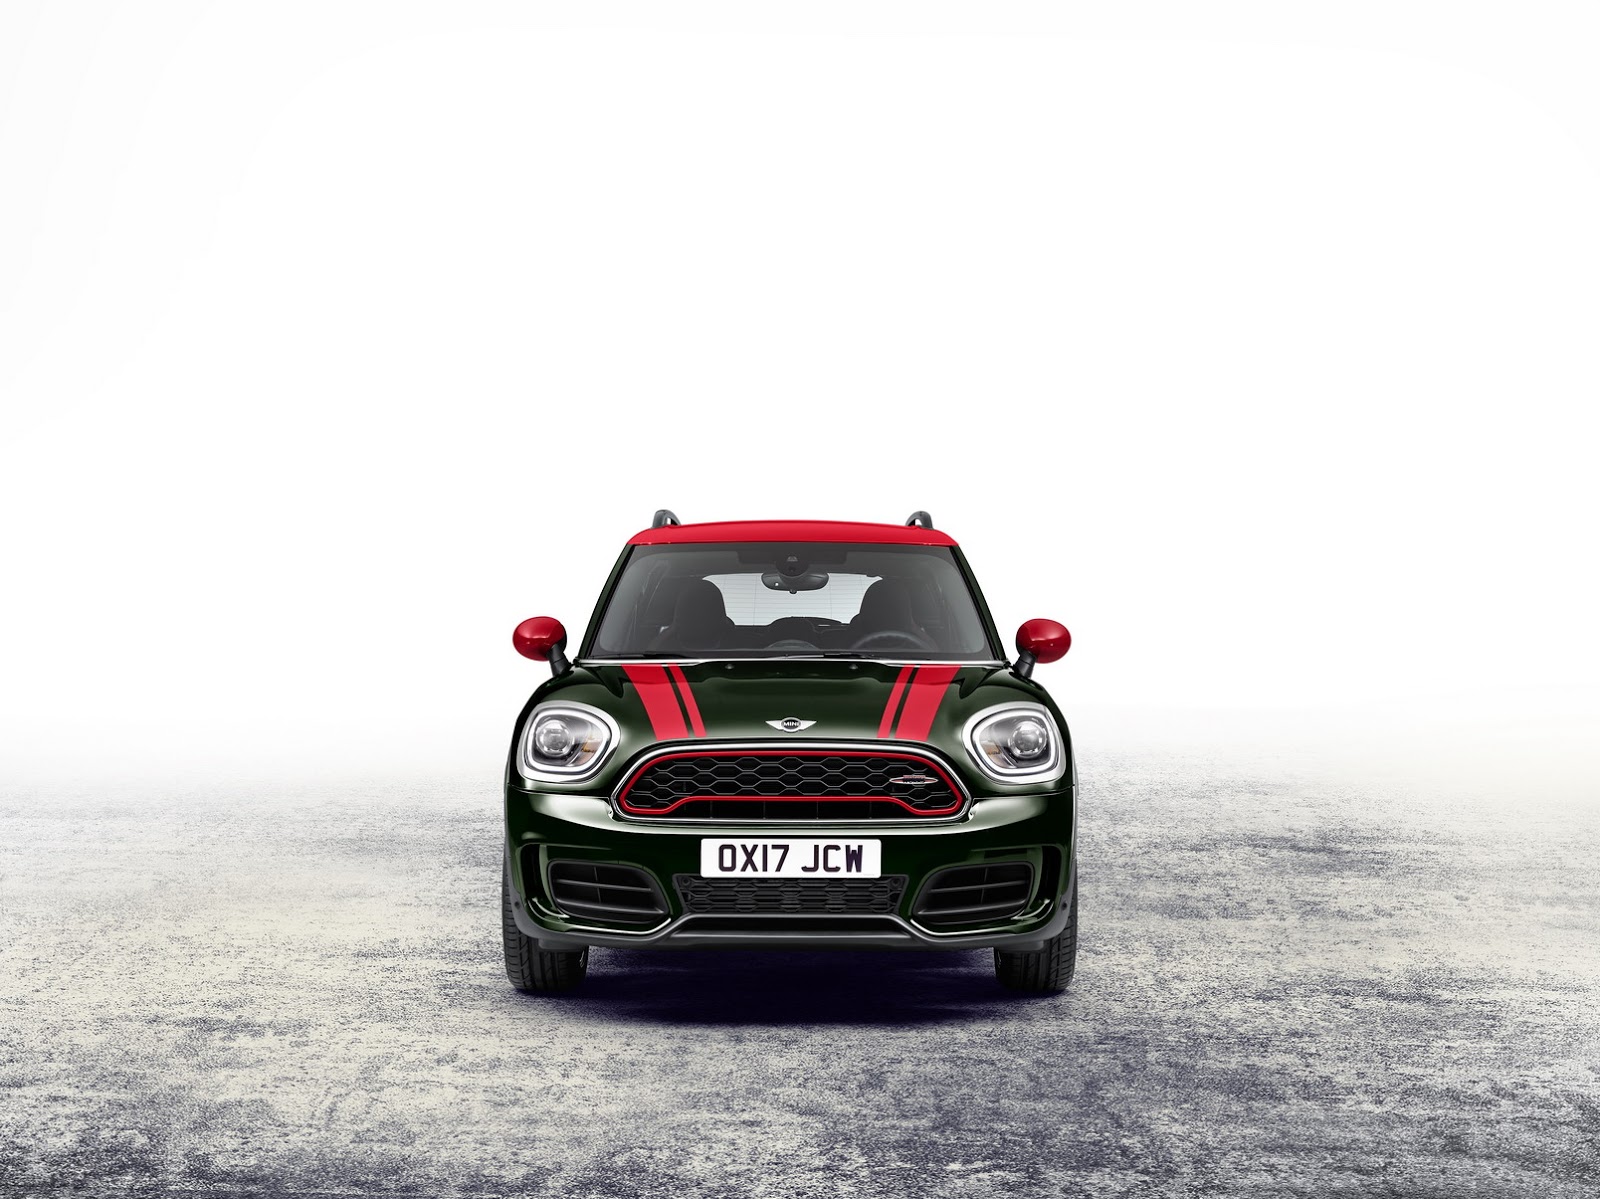 MINI Officially Launches 2018 John Cooper Works Countryman